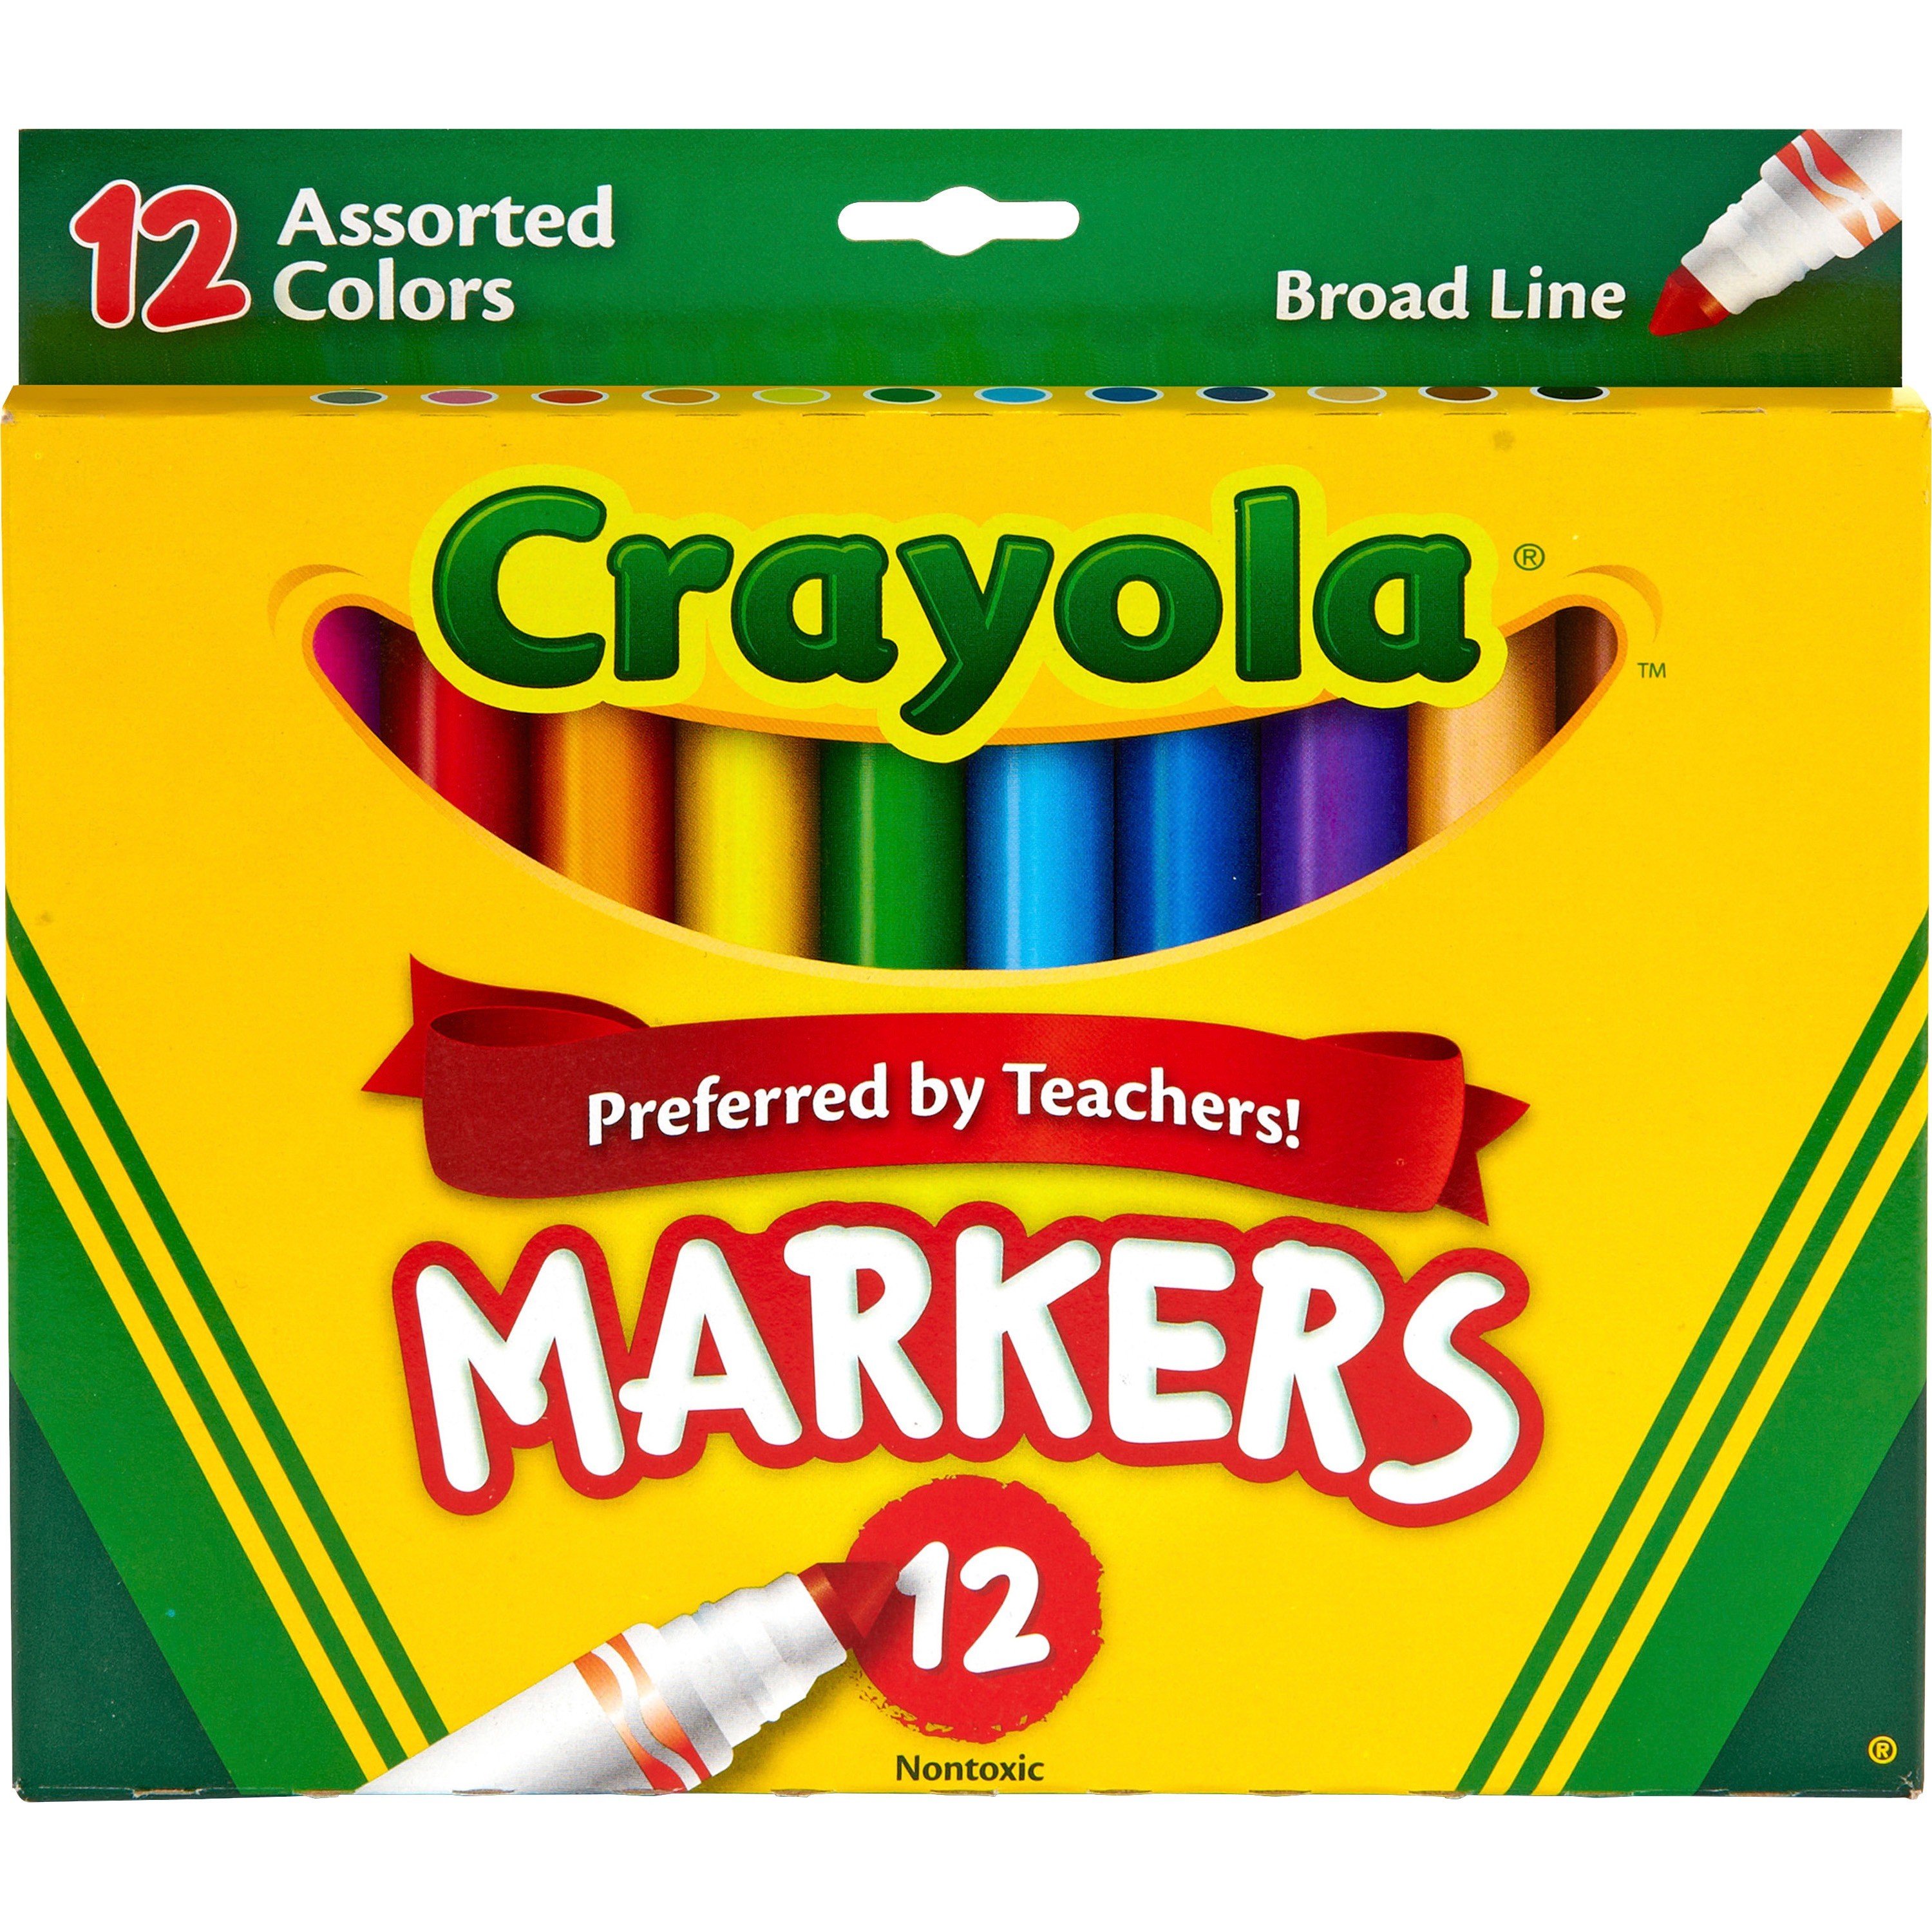 Crayola Markers Broad Line 10ct Classic